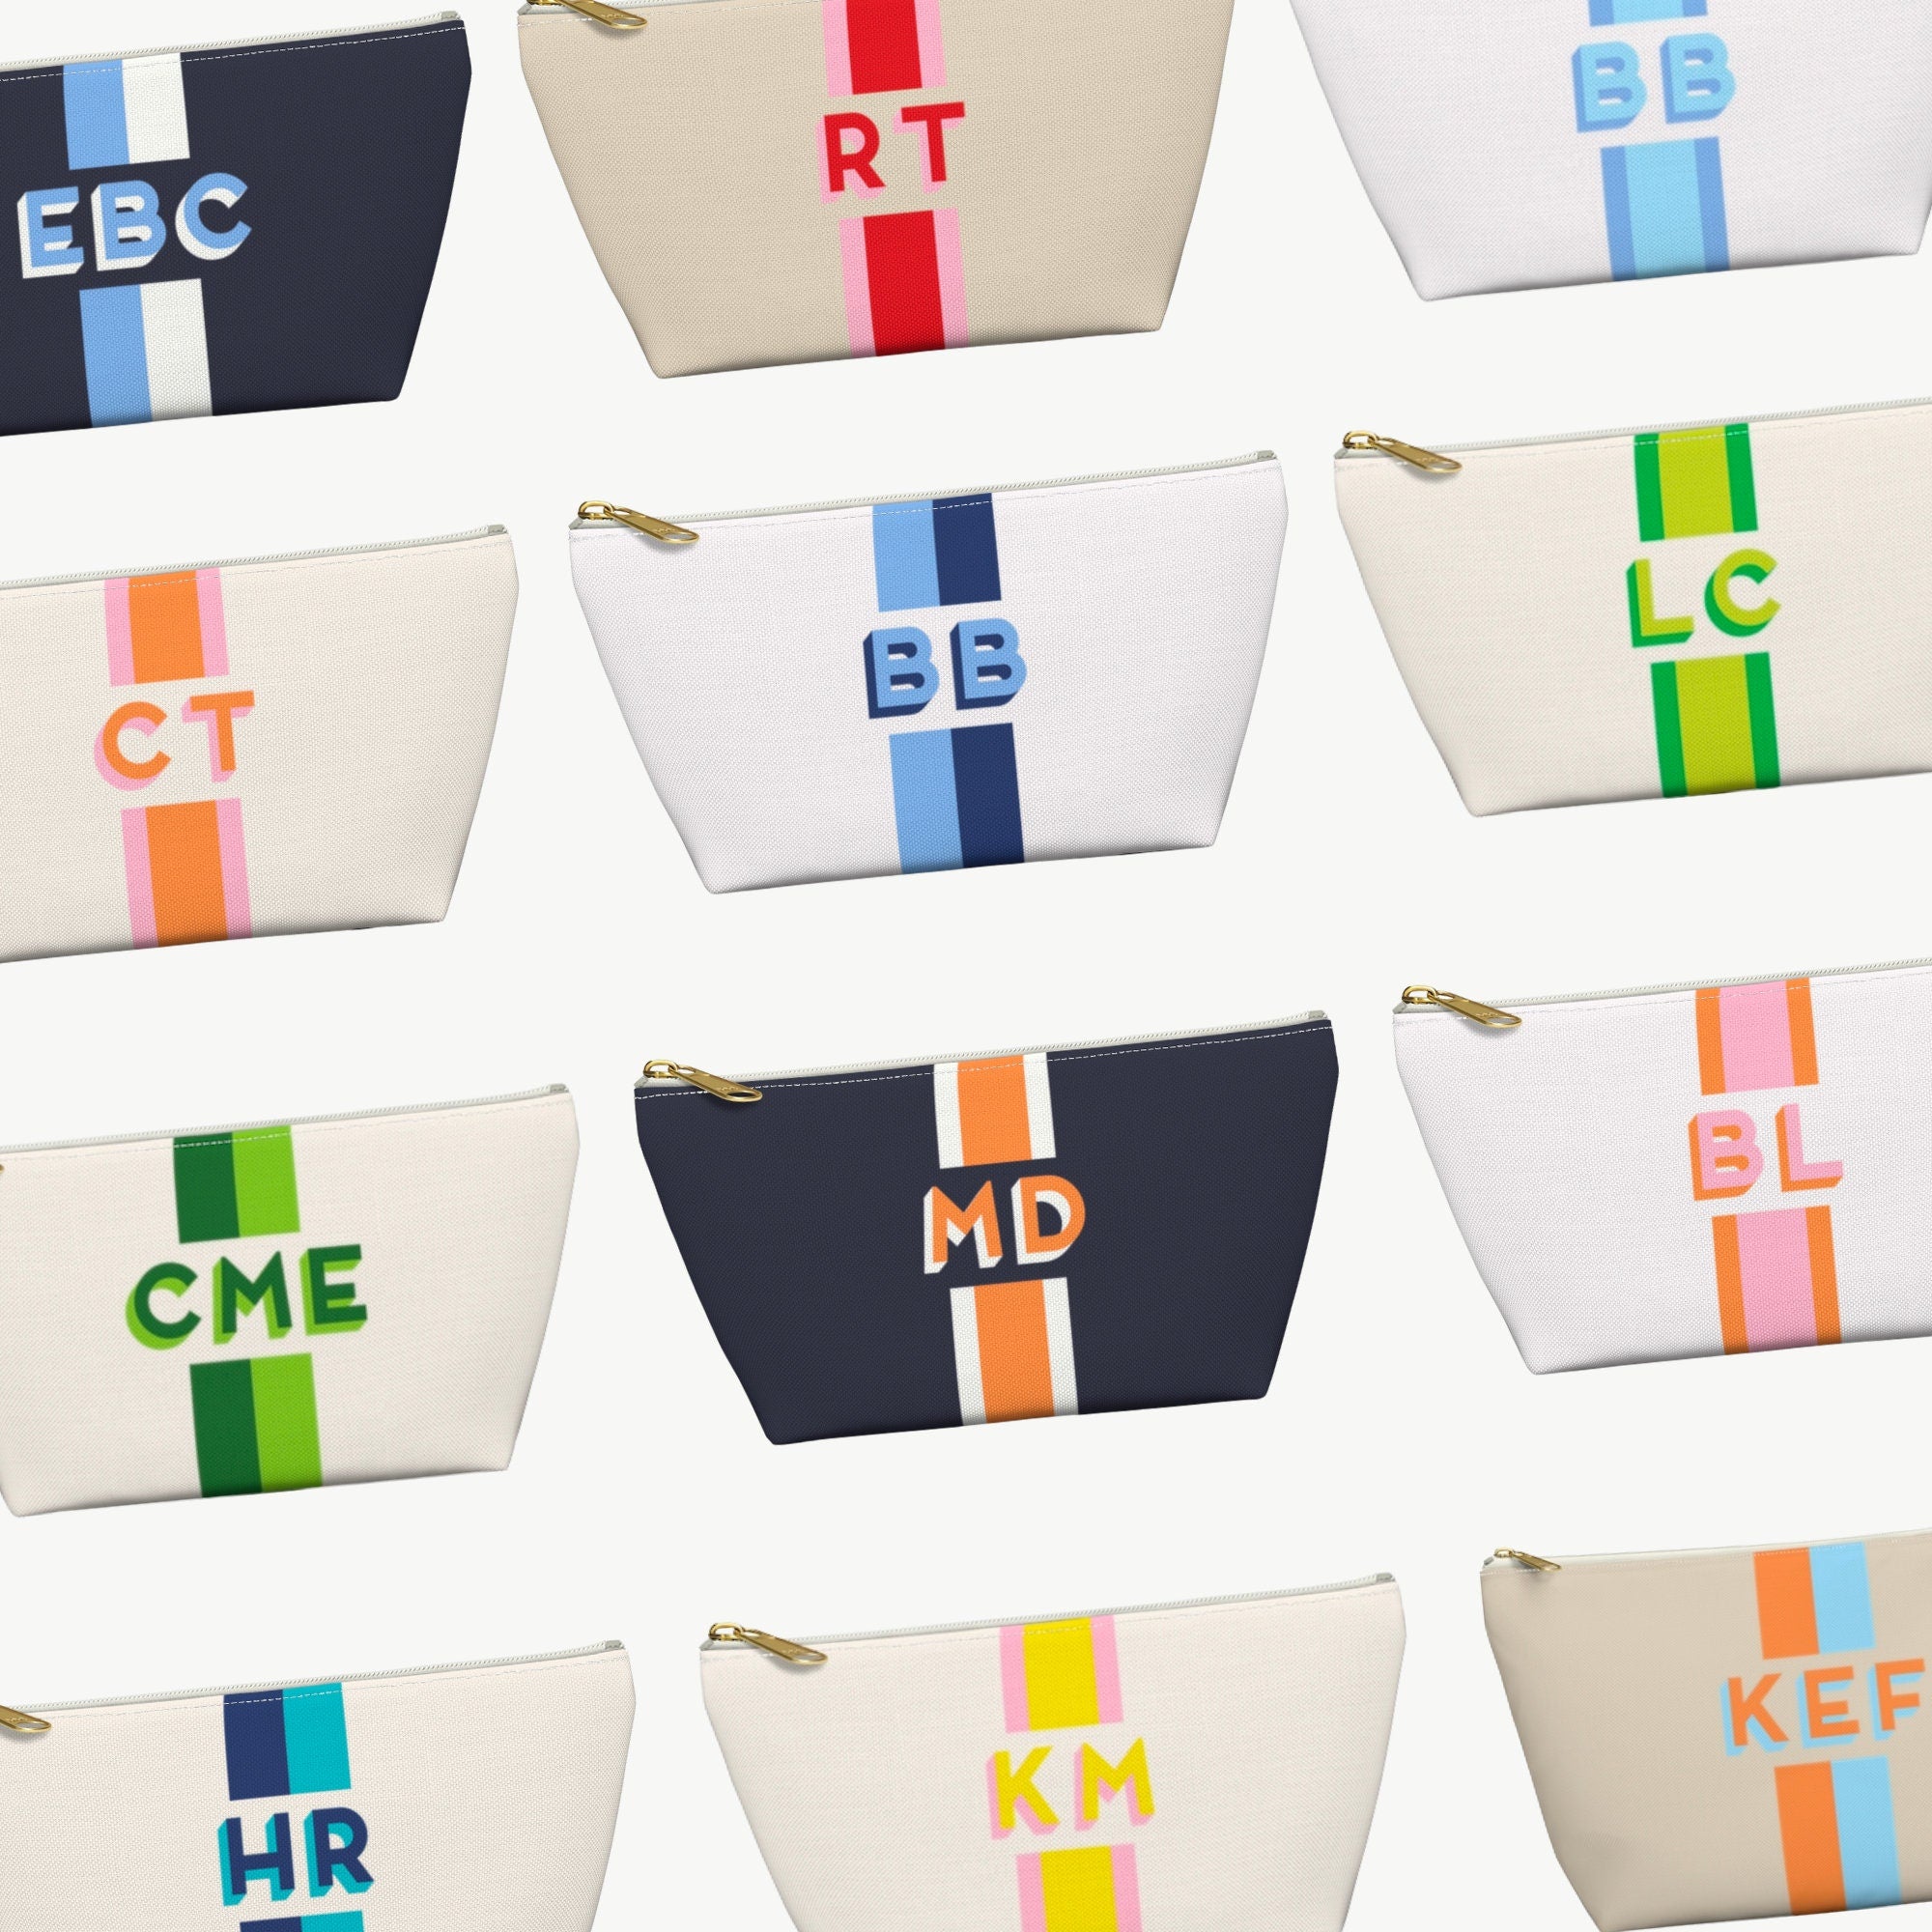 Pouch Personalisation